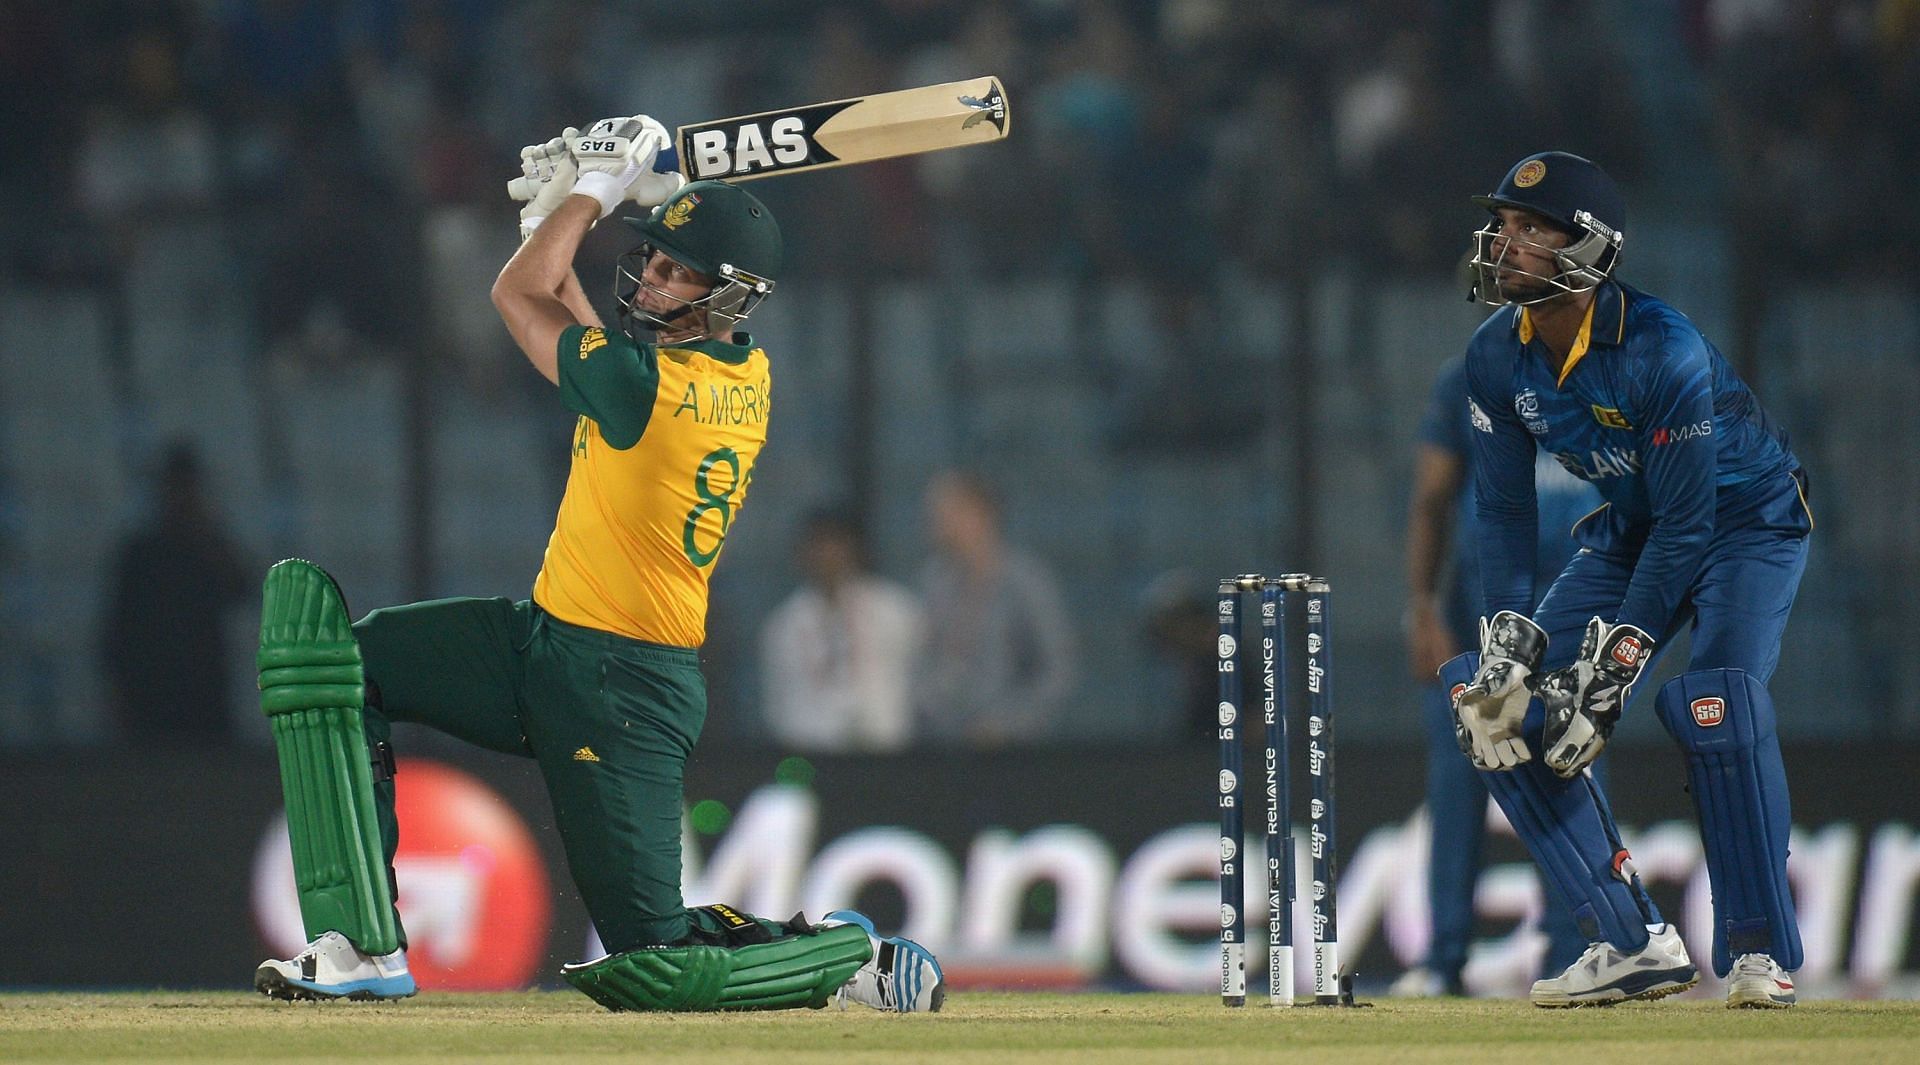 While he was a feared finisher, Morkel could comfortably take down spin in the middle-overs too (File image).